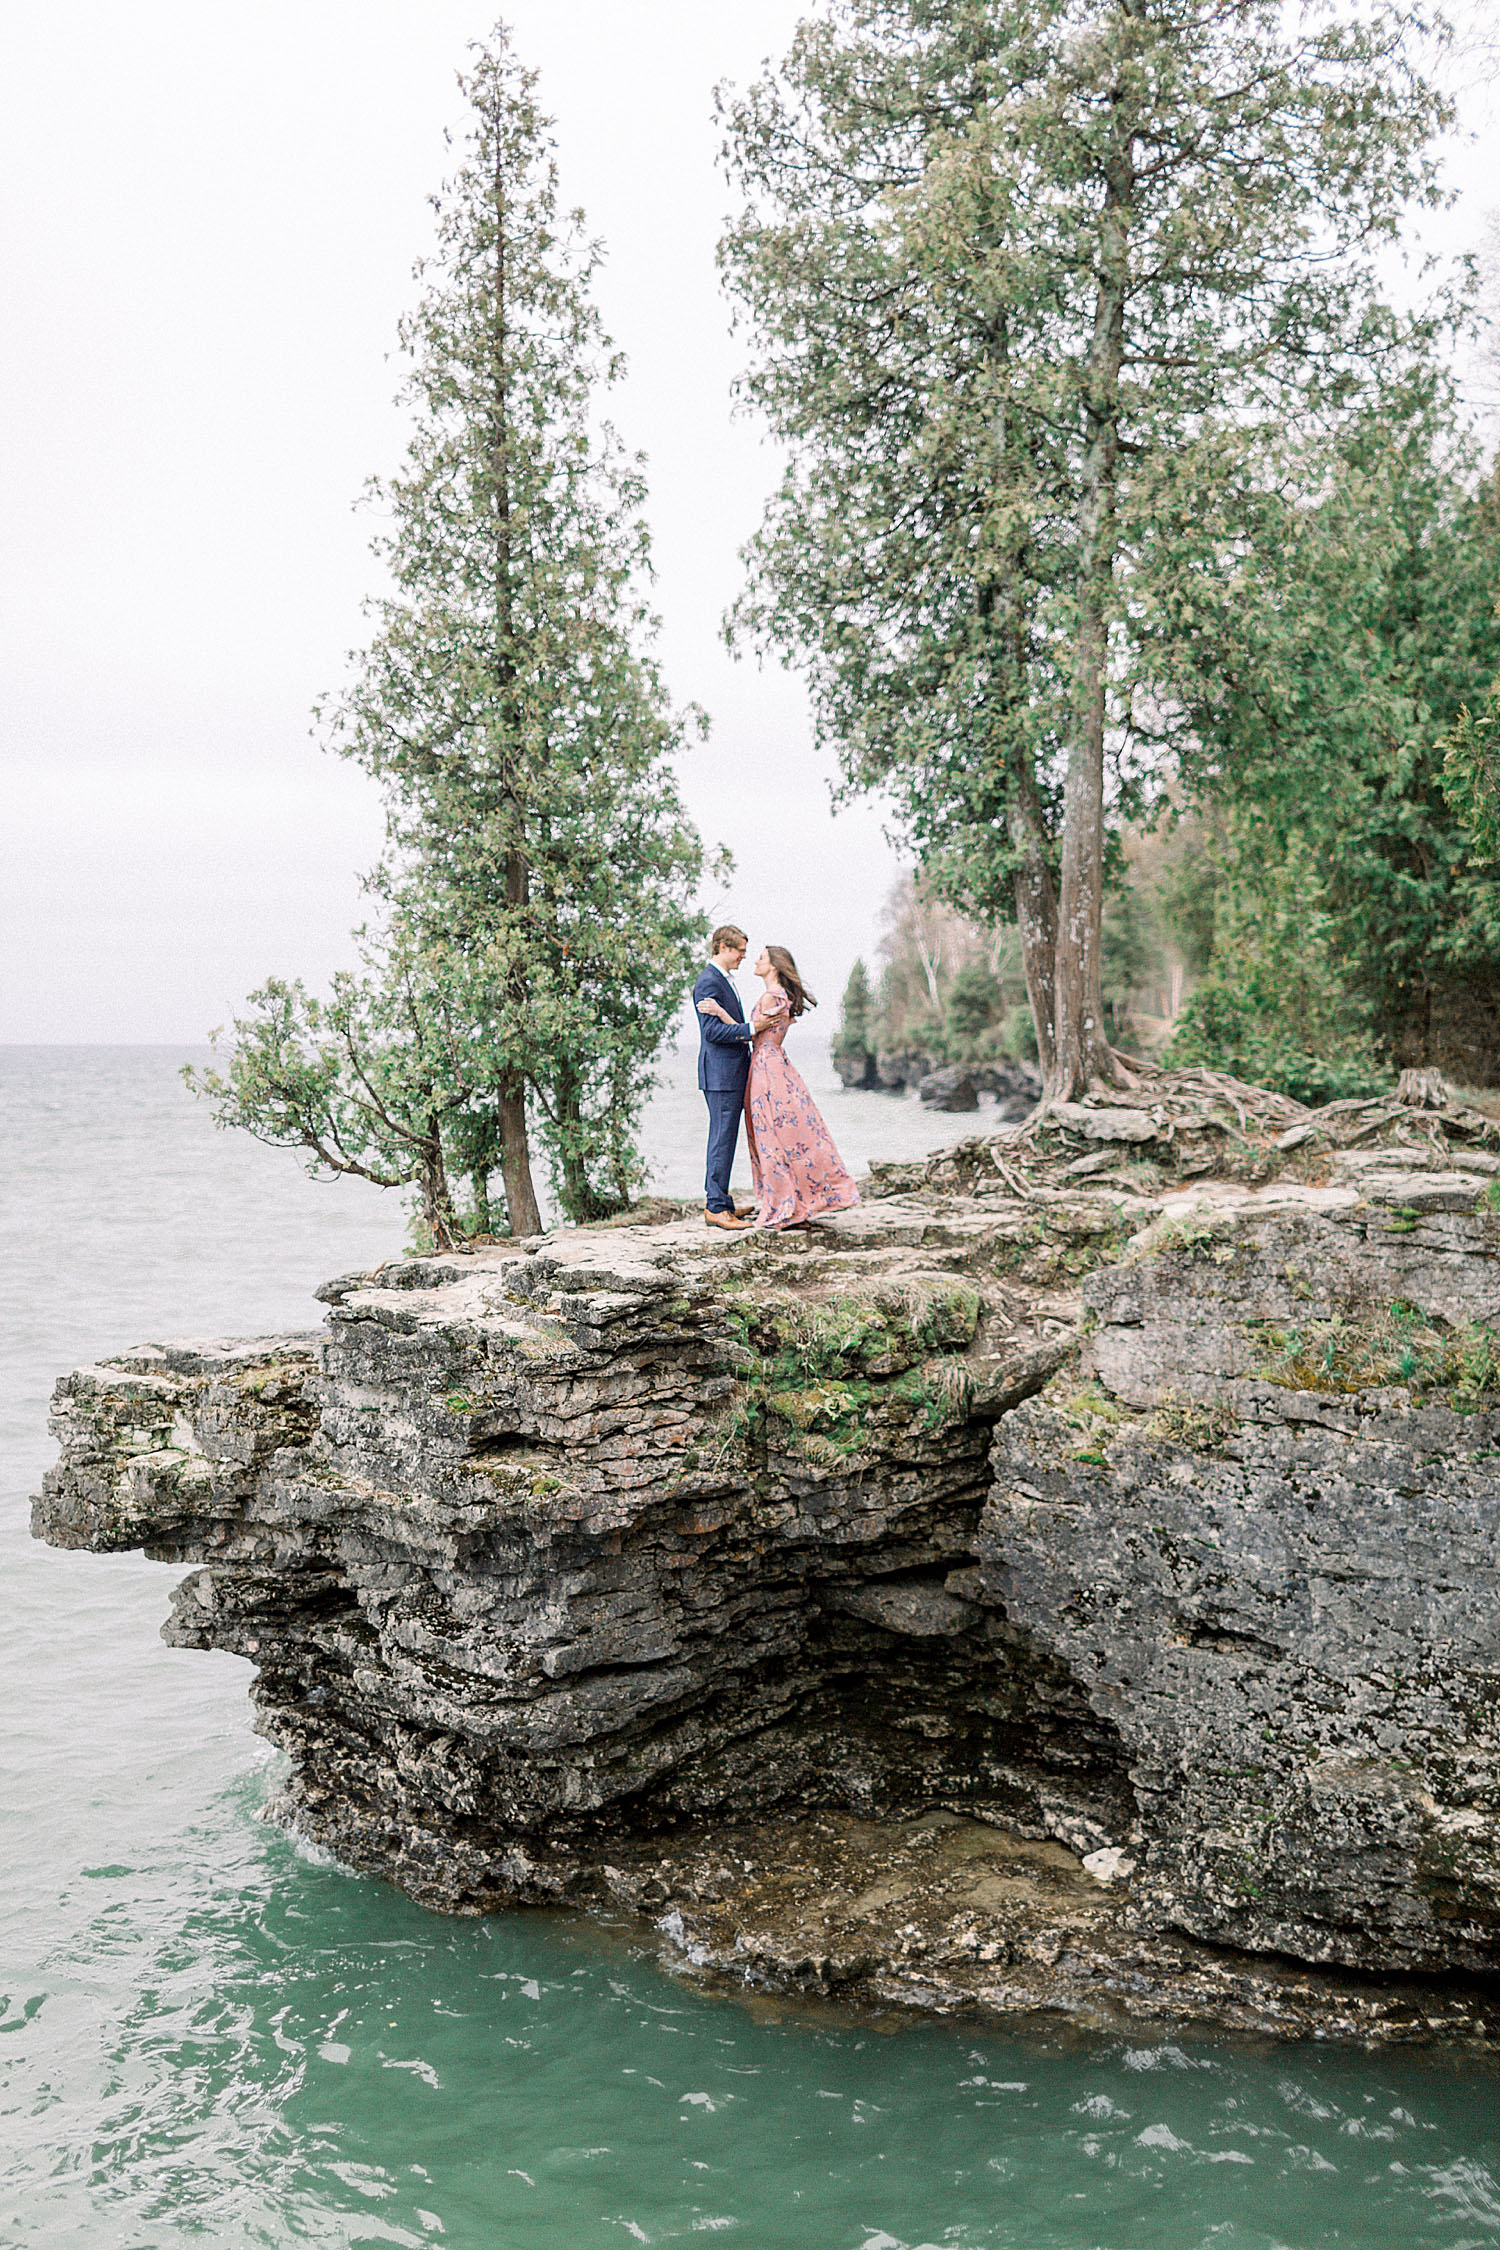 A couple embracing at Cave Point on the bluff. Door County Travel Guide